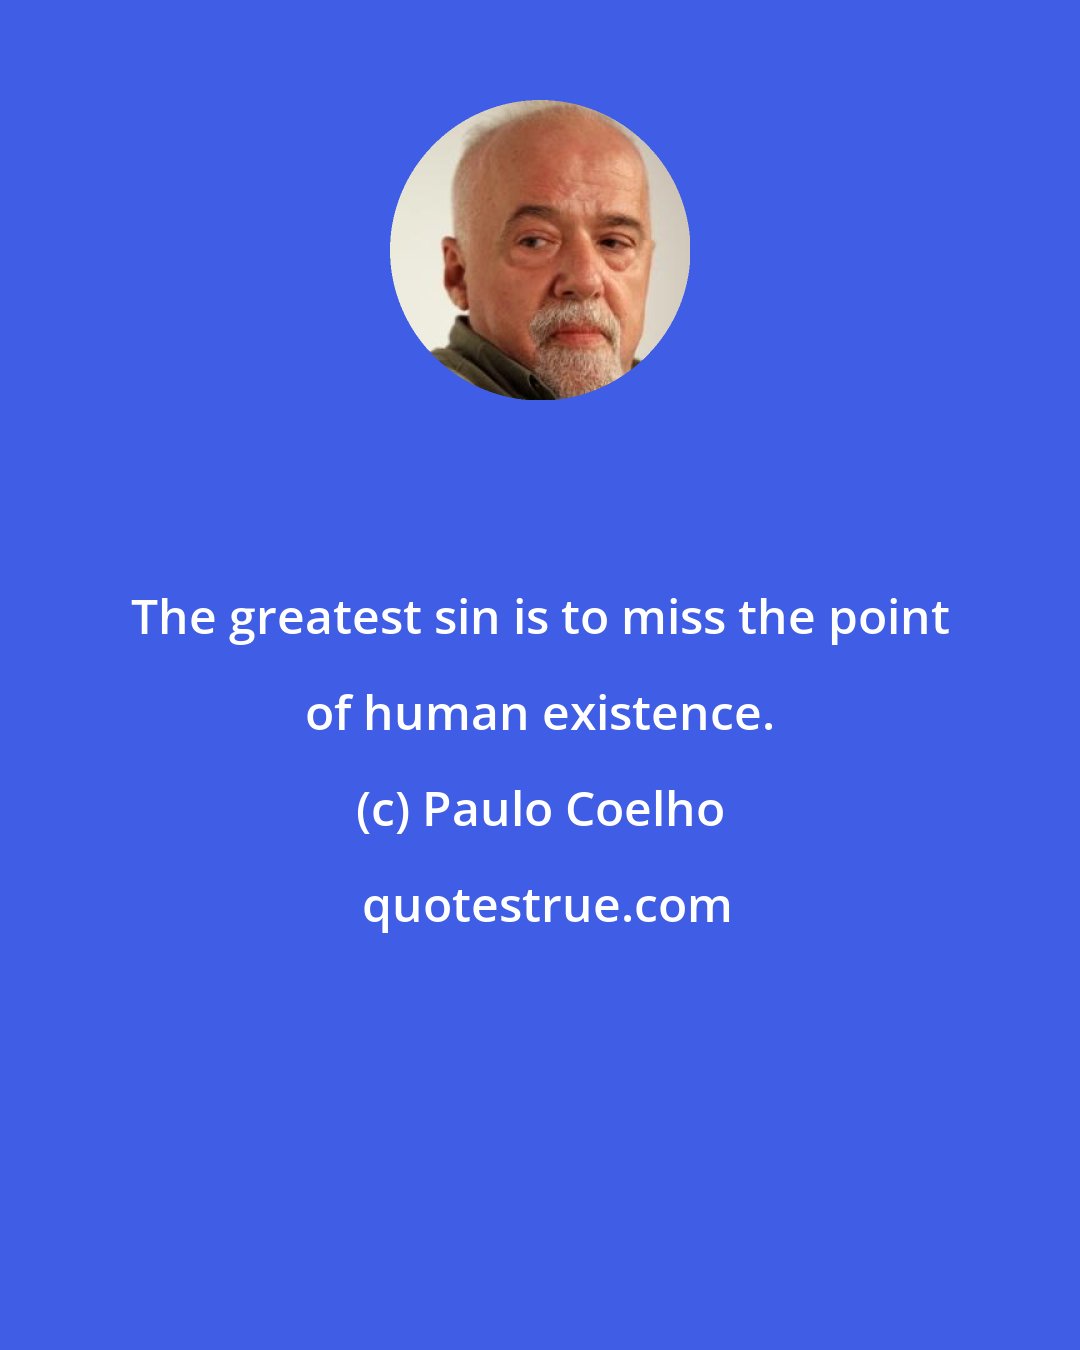 Paulo Coelho: The greatest sin is to miss the point of human existence.